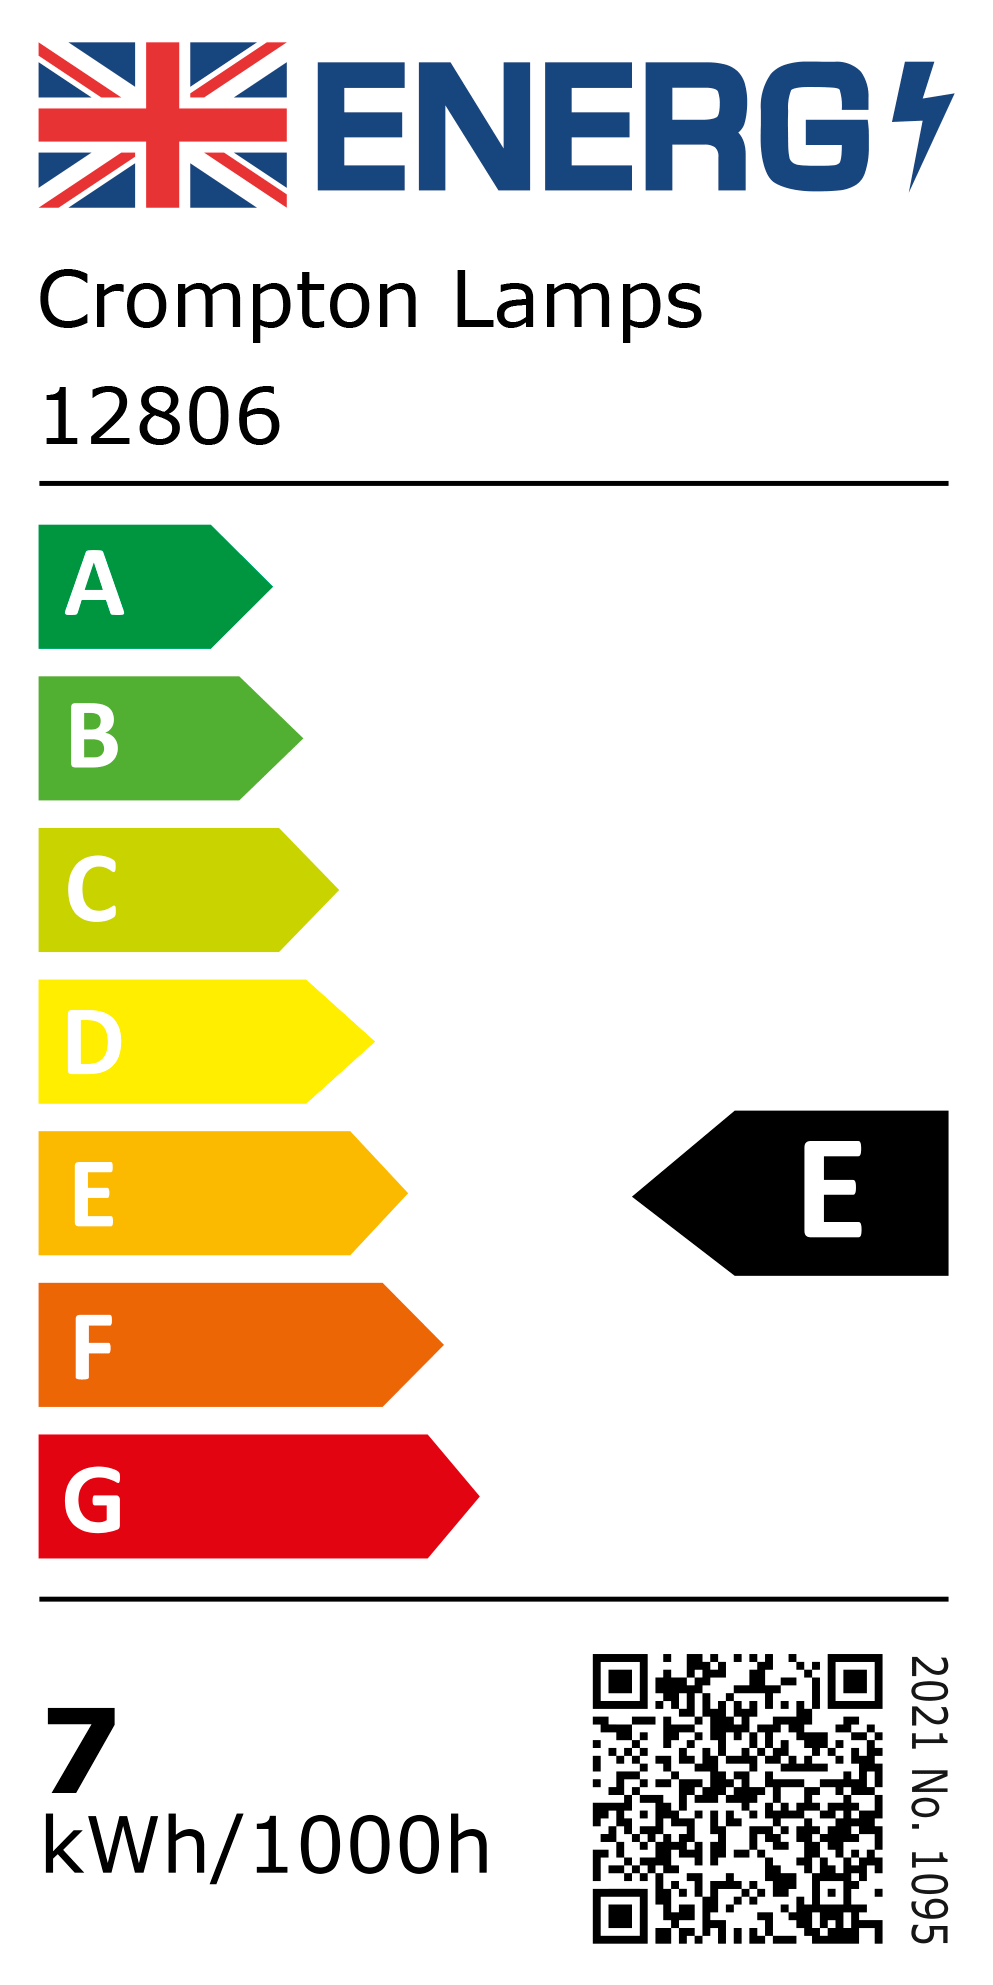 New 2021 Energy Rating Label: Stock Code 12806